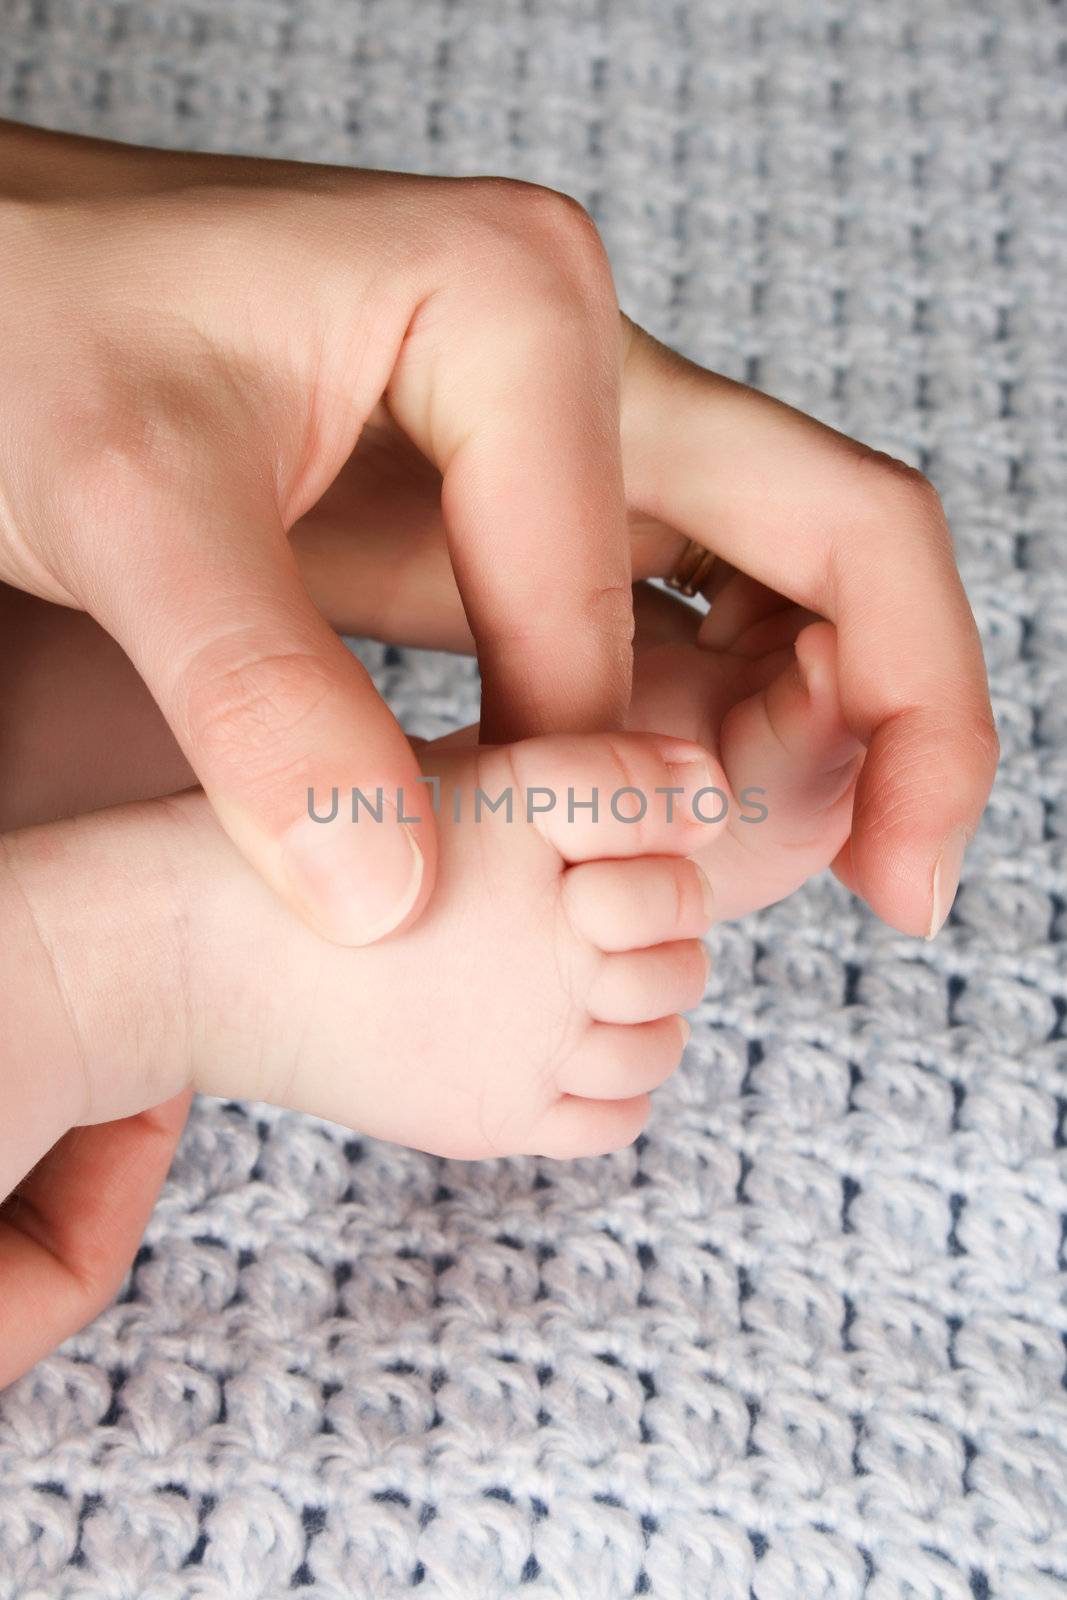 Hands and feet of caucasian mother and baby